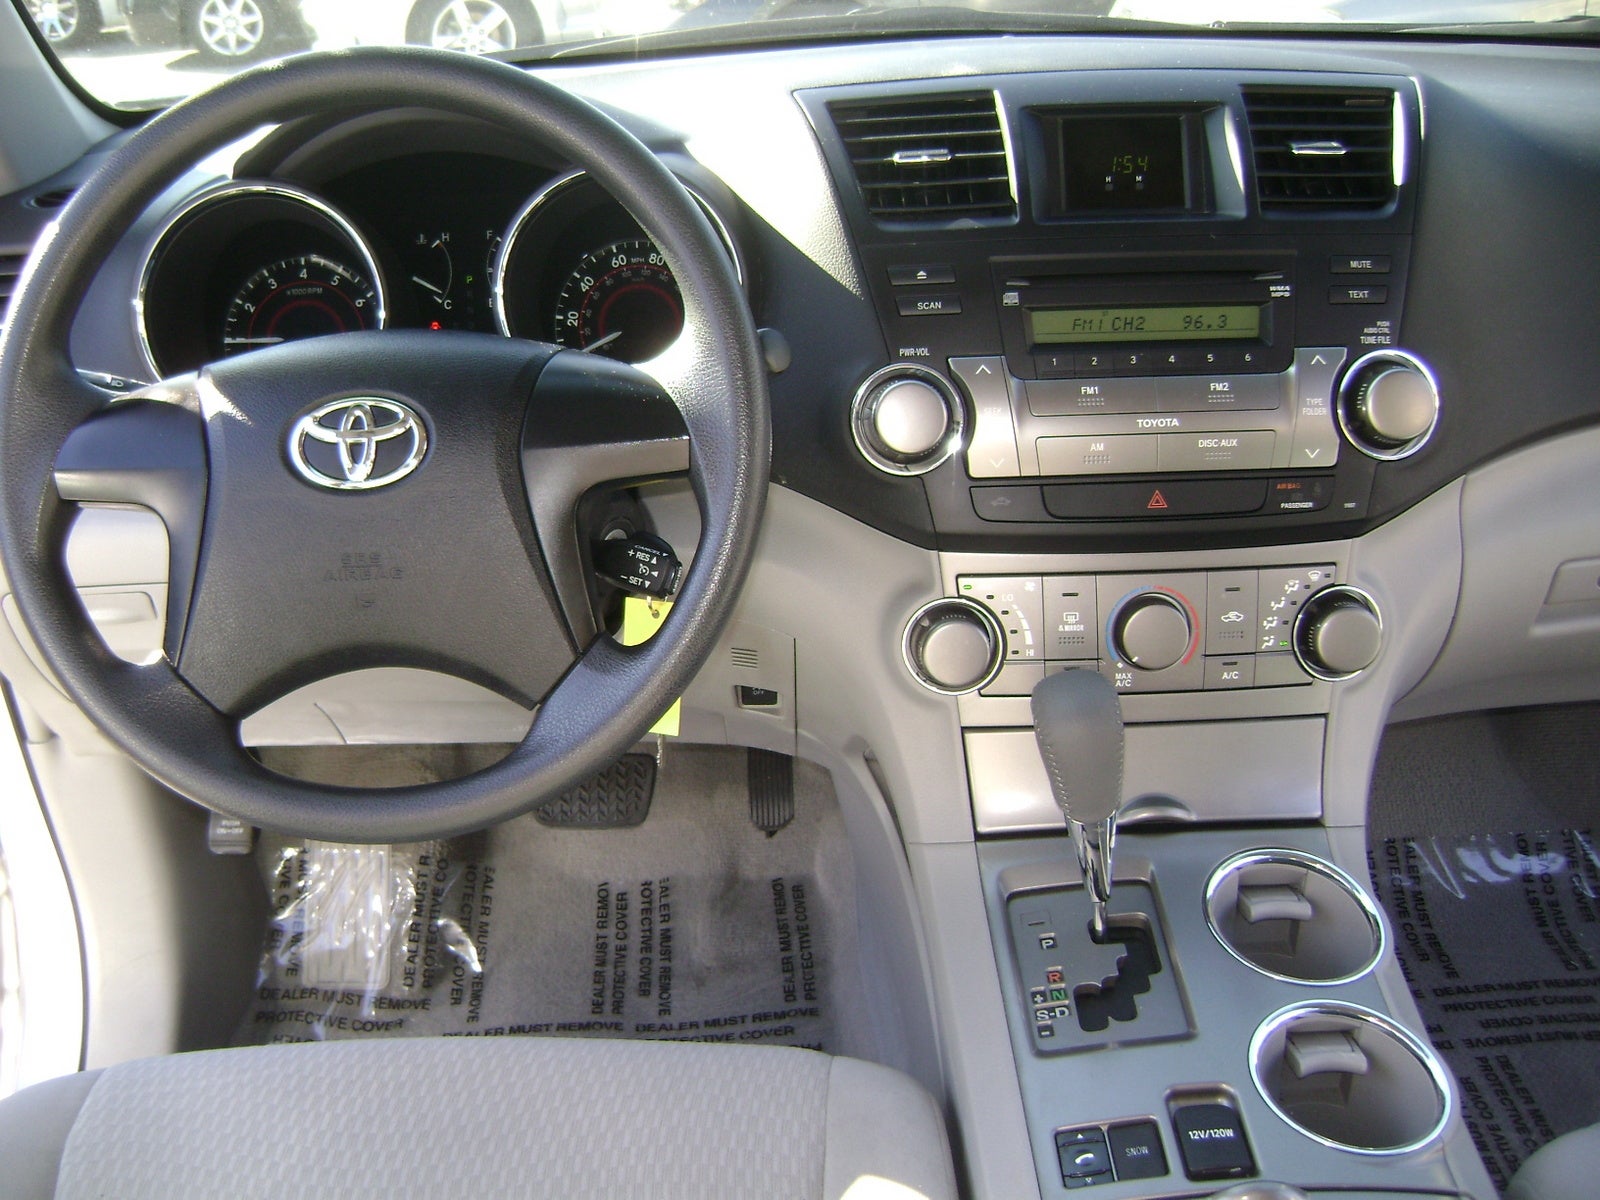 2010 Toyota Highlander Base V6 - Pictures - Picture of 2010 Toyota ...